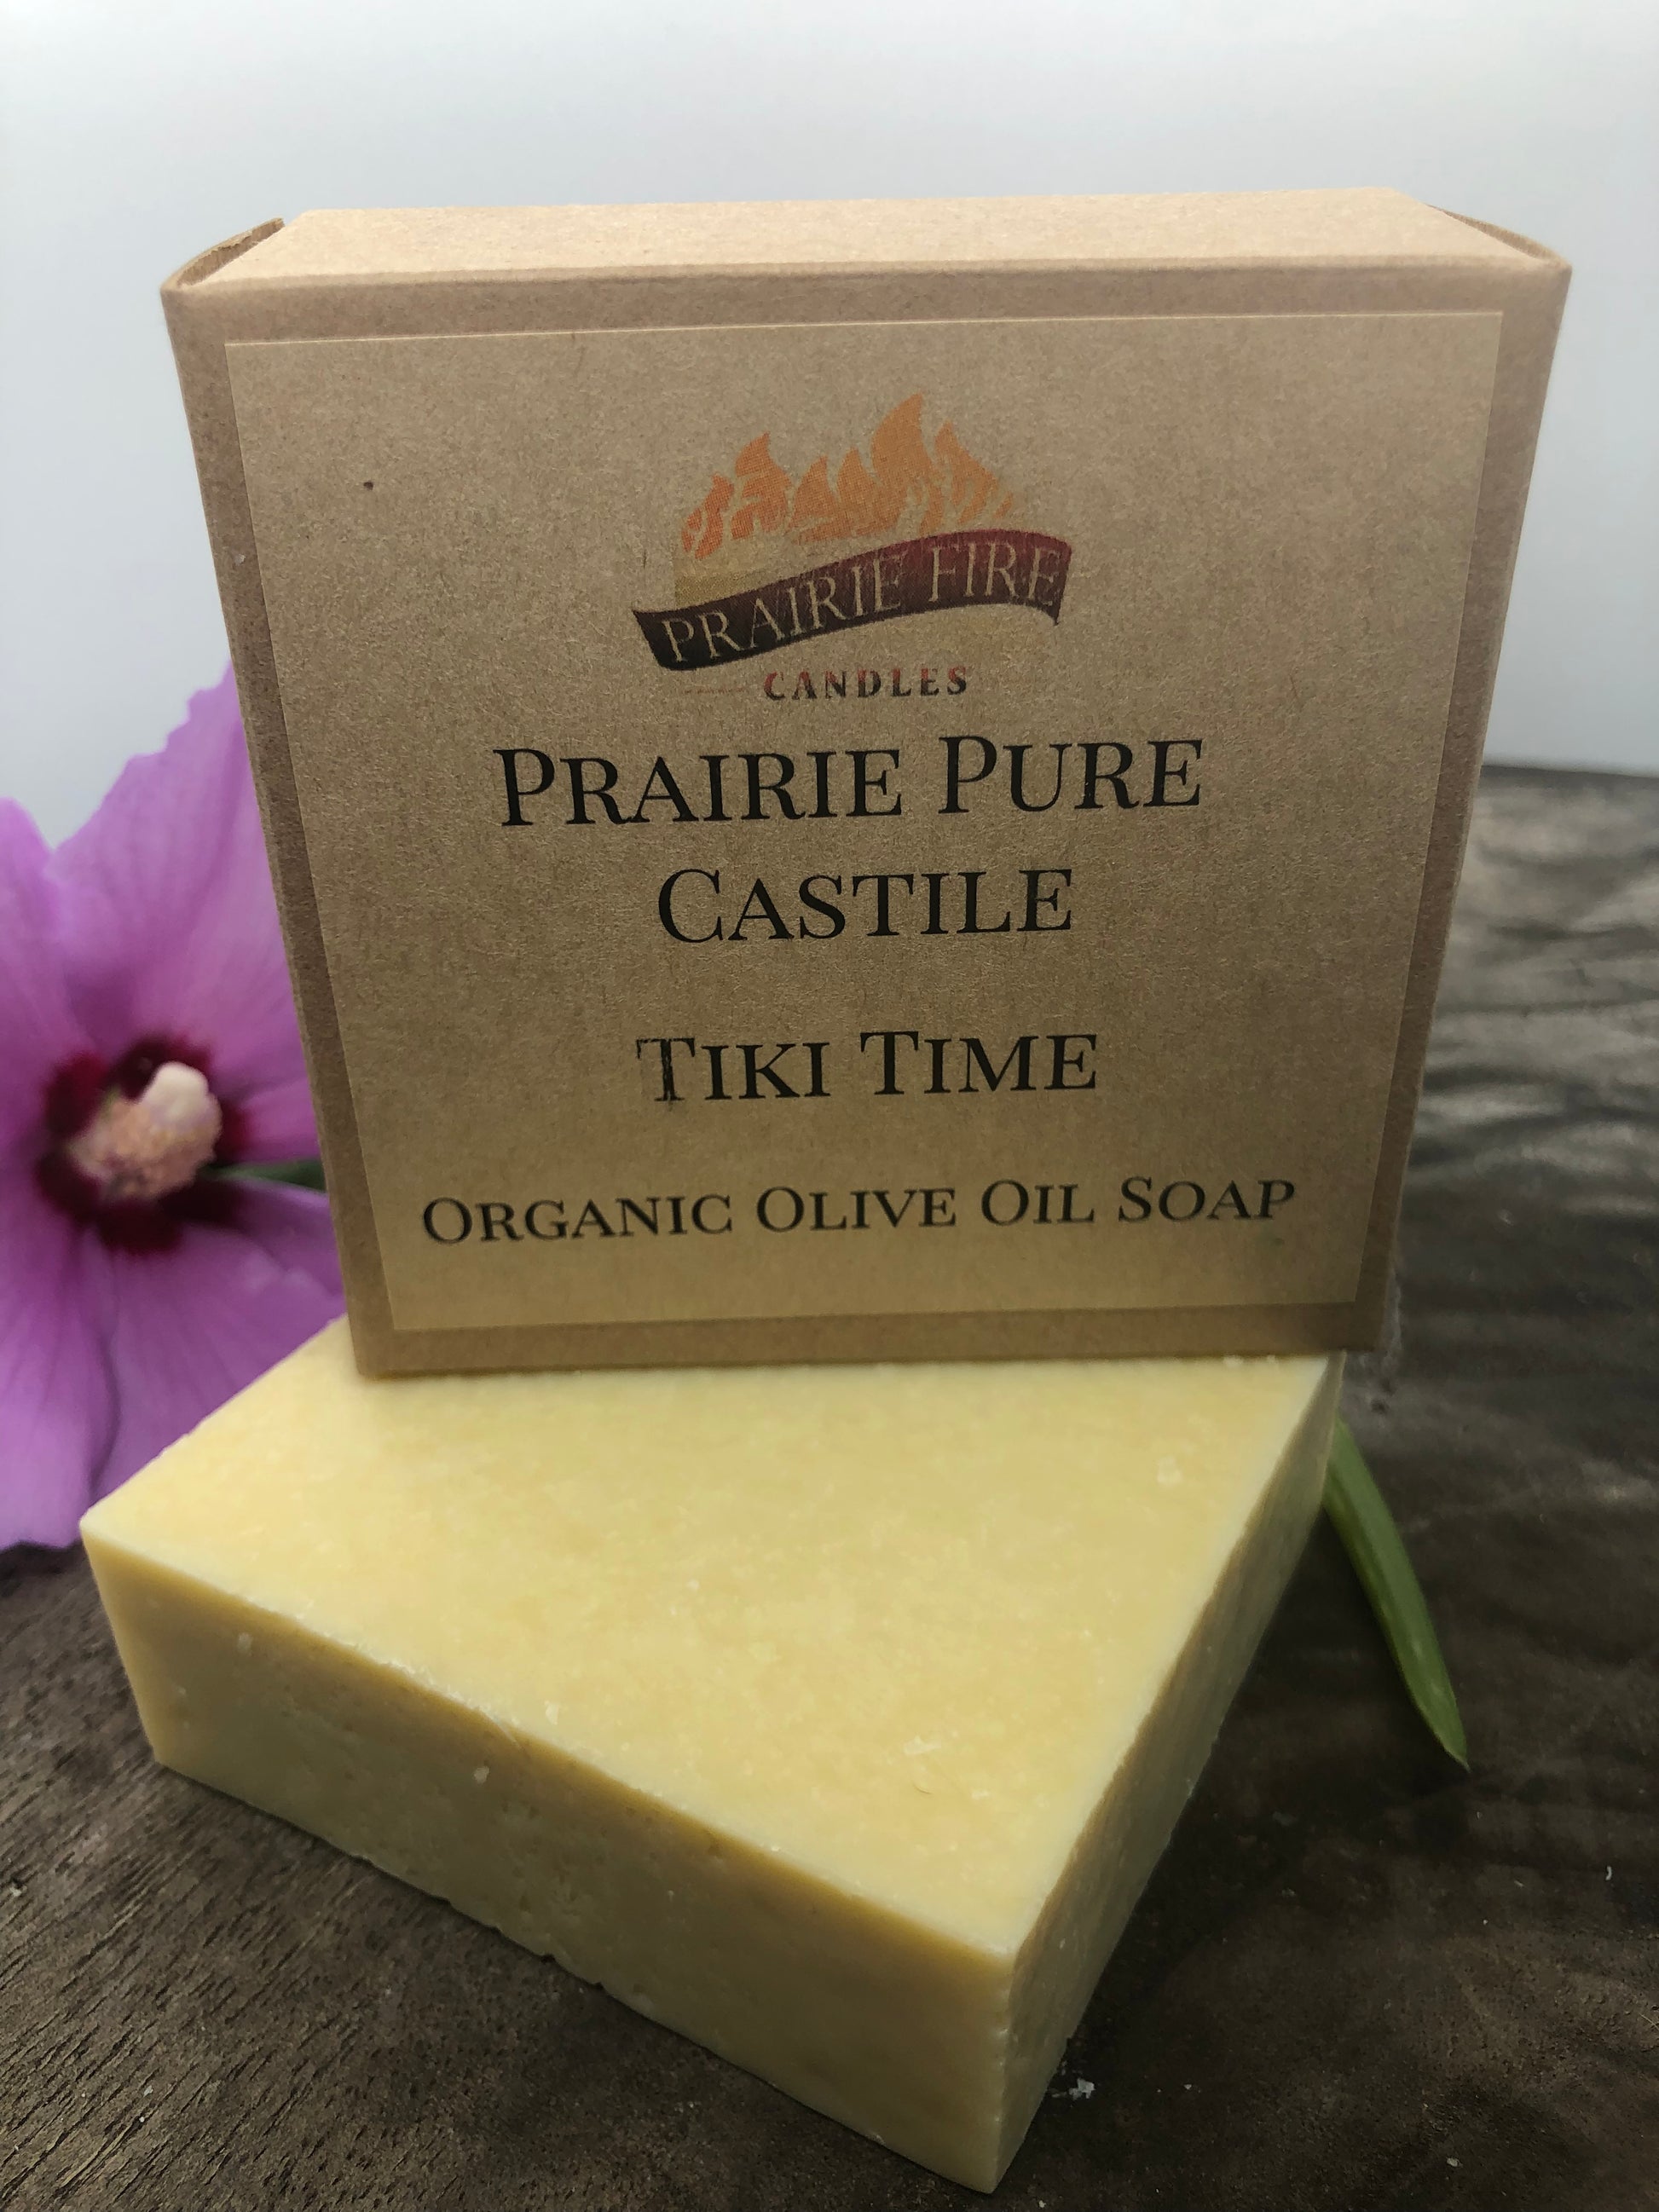 Tiki Time Real Castile Organic Olive Oil Soap for Sensitive Skin - Dye Free - 100% Certified Organic Extra Virgin Olive Oil - Prairie Fire Candles